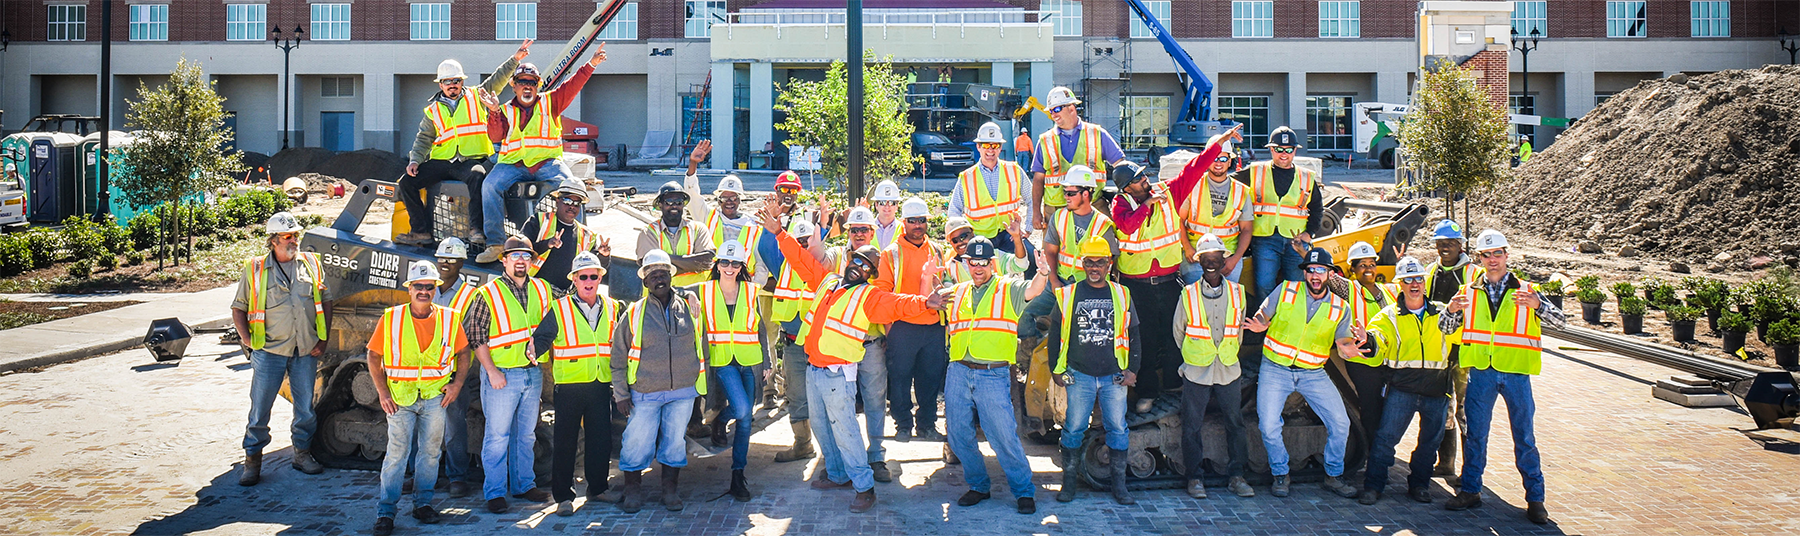 a group shot of Durr employees at a project site with their hands raised in the air for celebration